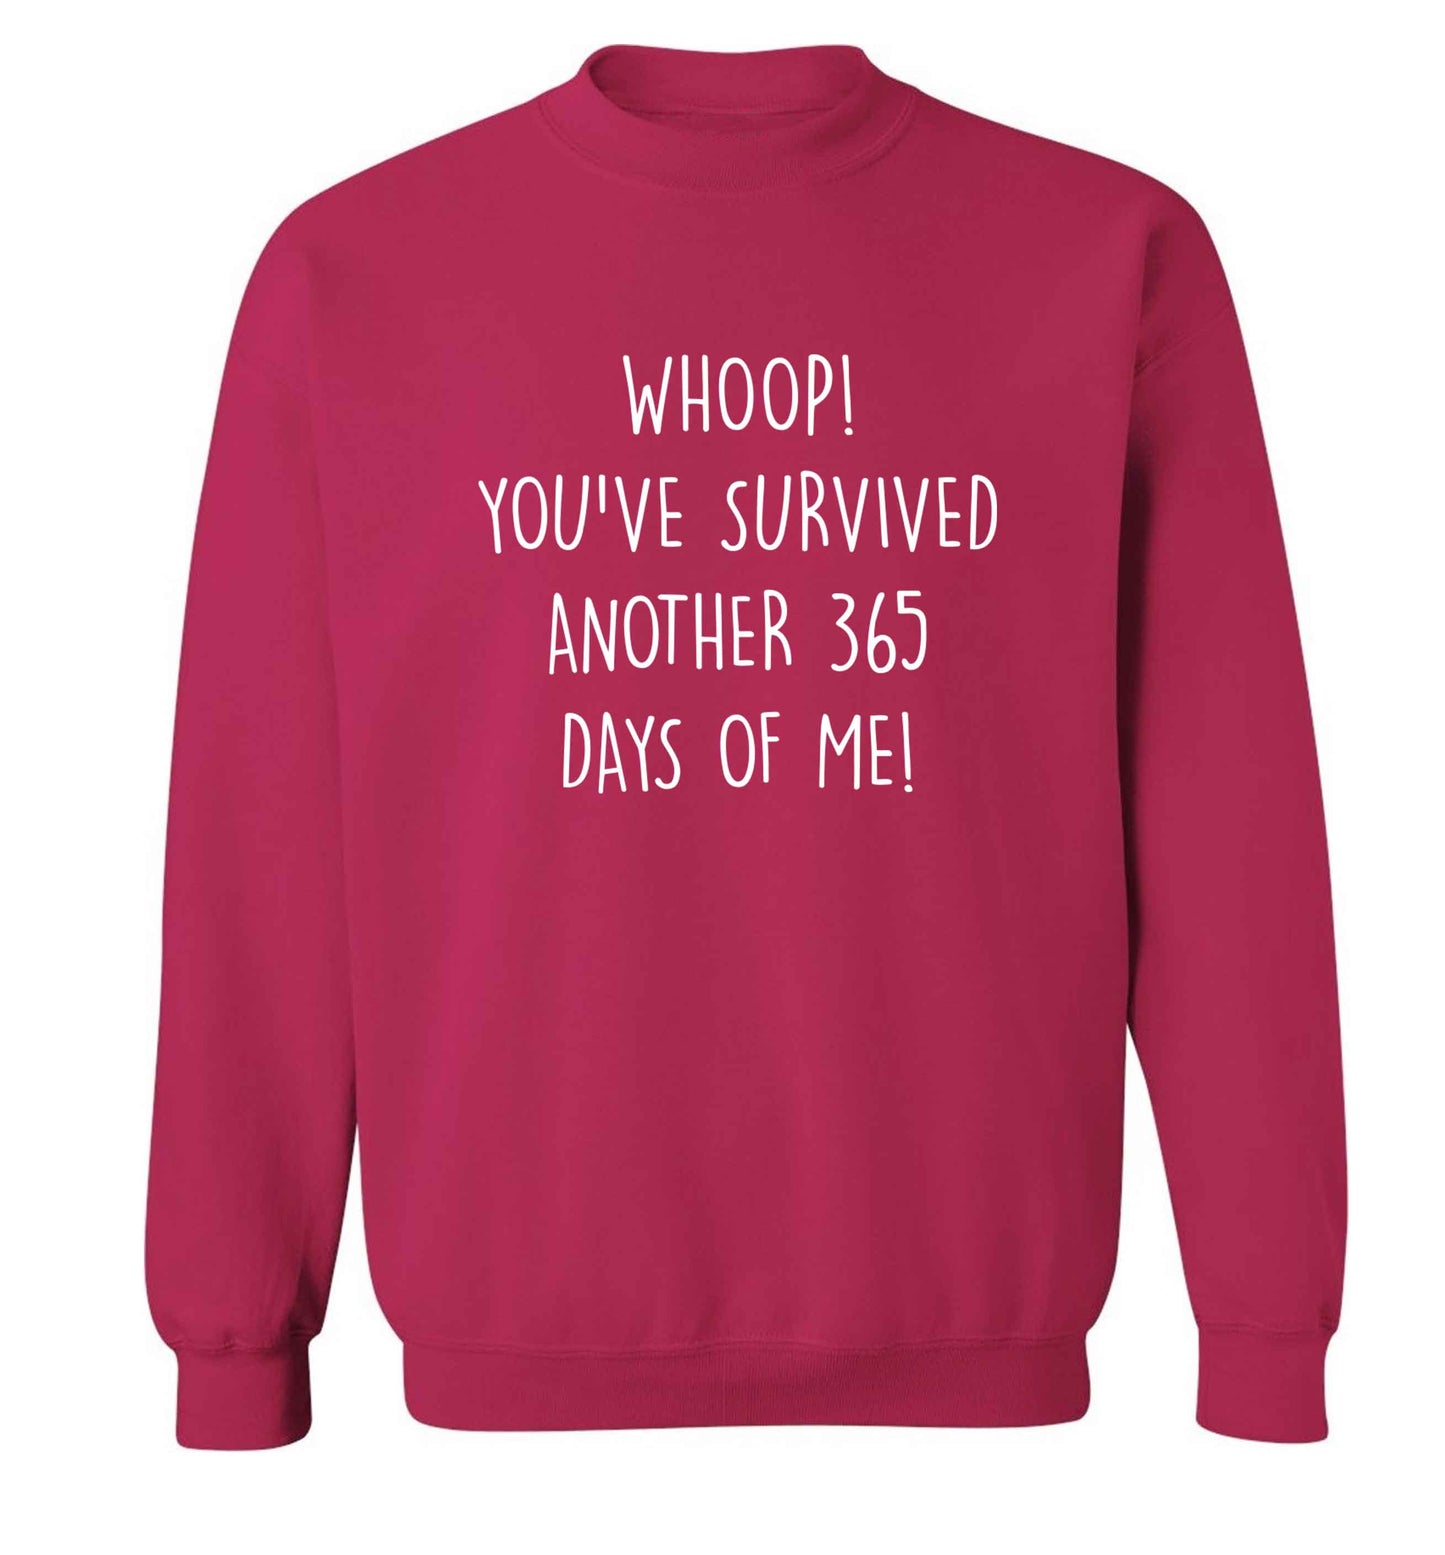 Whoop! You've survived another 365 days with me! adult's unisex pink sweater 2XL